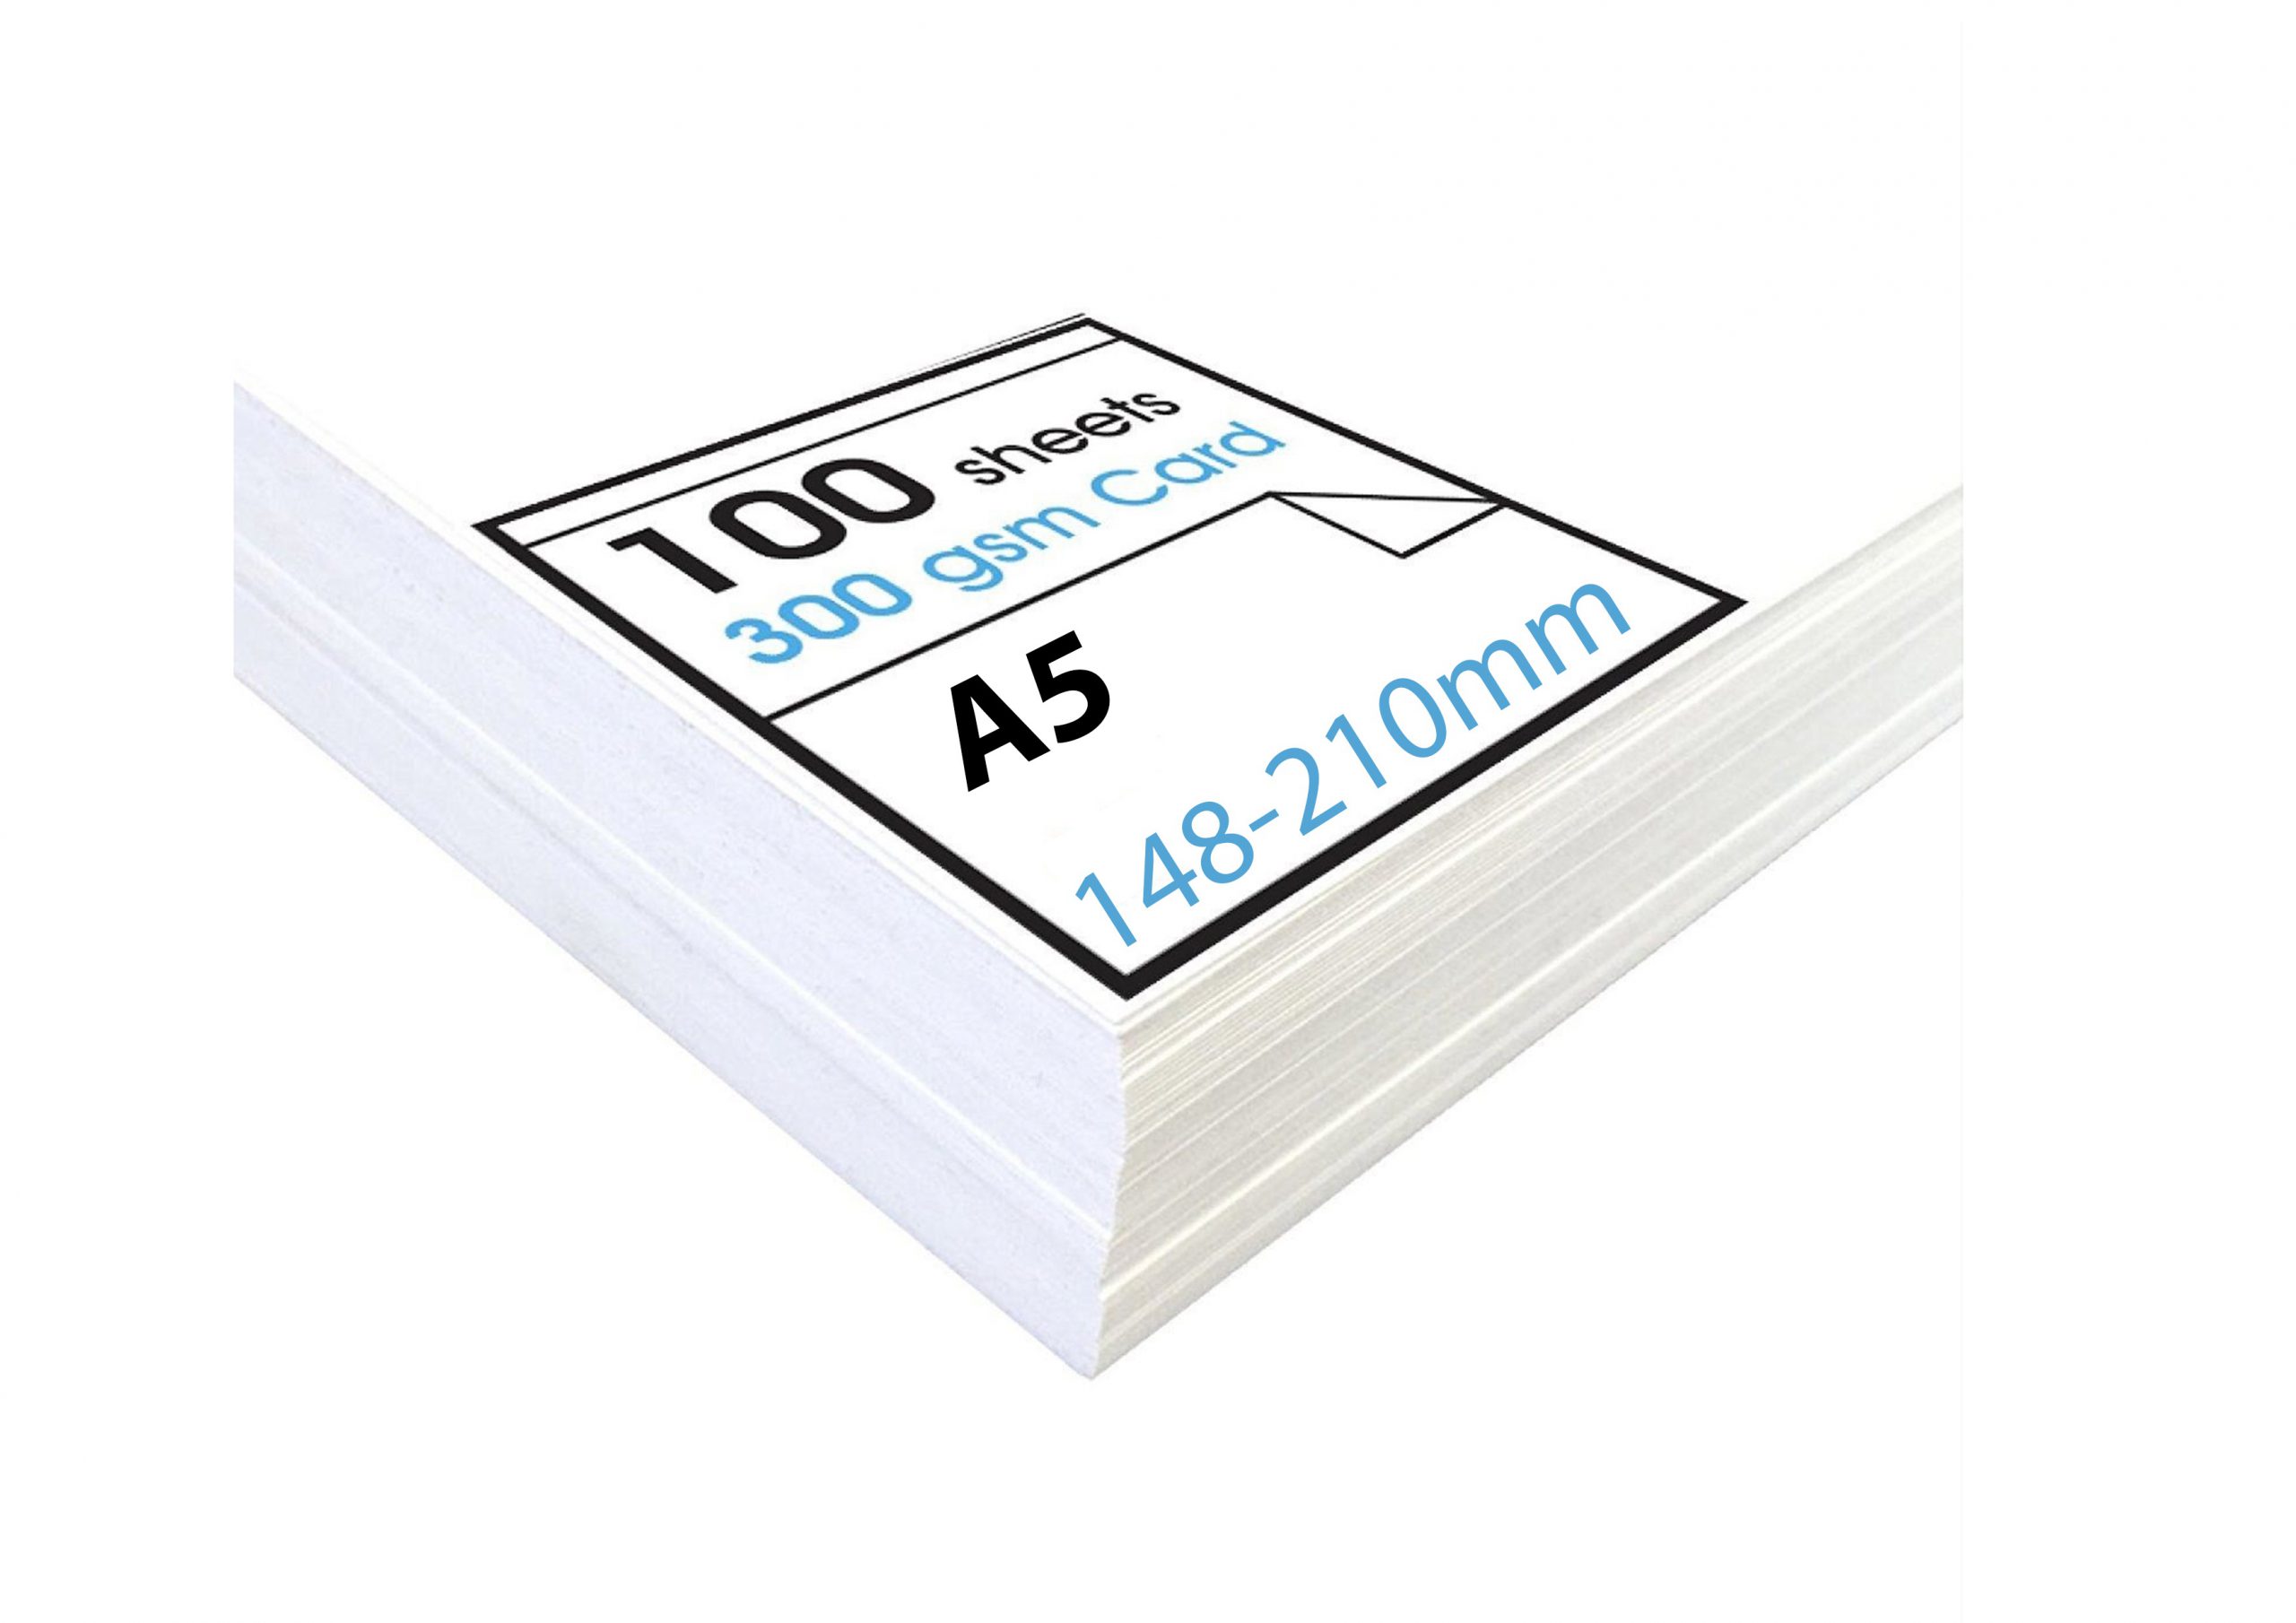 A6 A5 A4 A3 A2 WHITE BACKING BOARD CRAFT CARD THICK PAPER